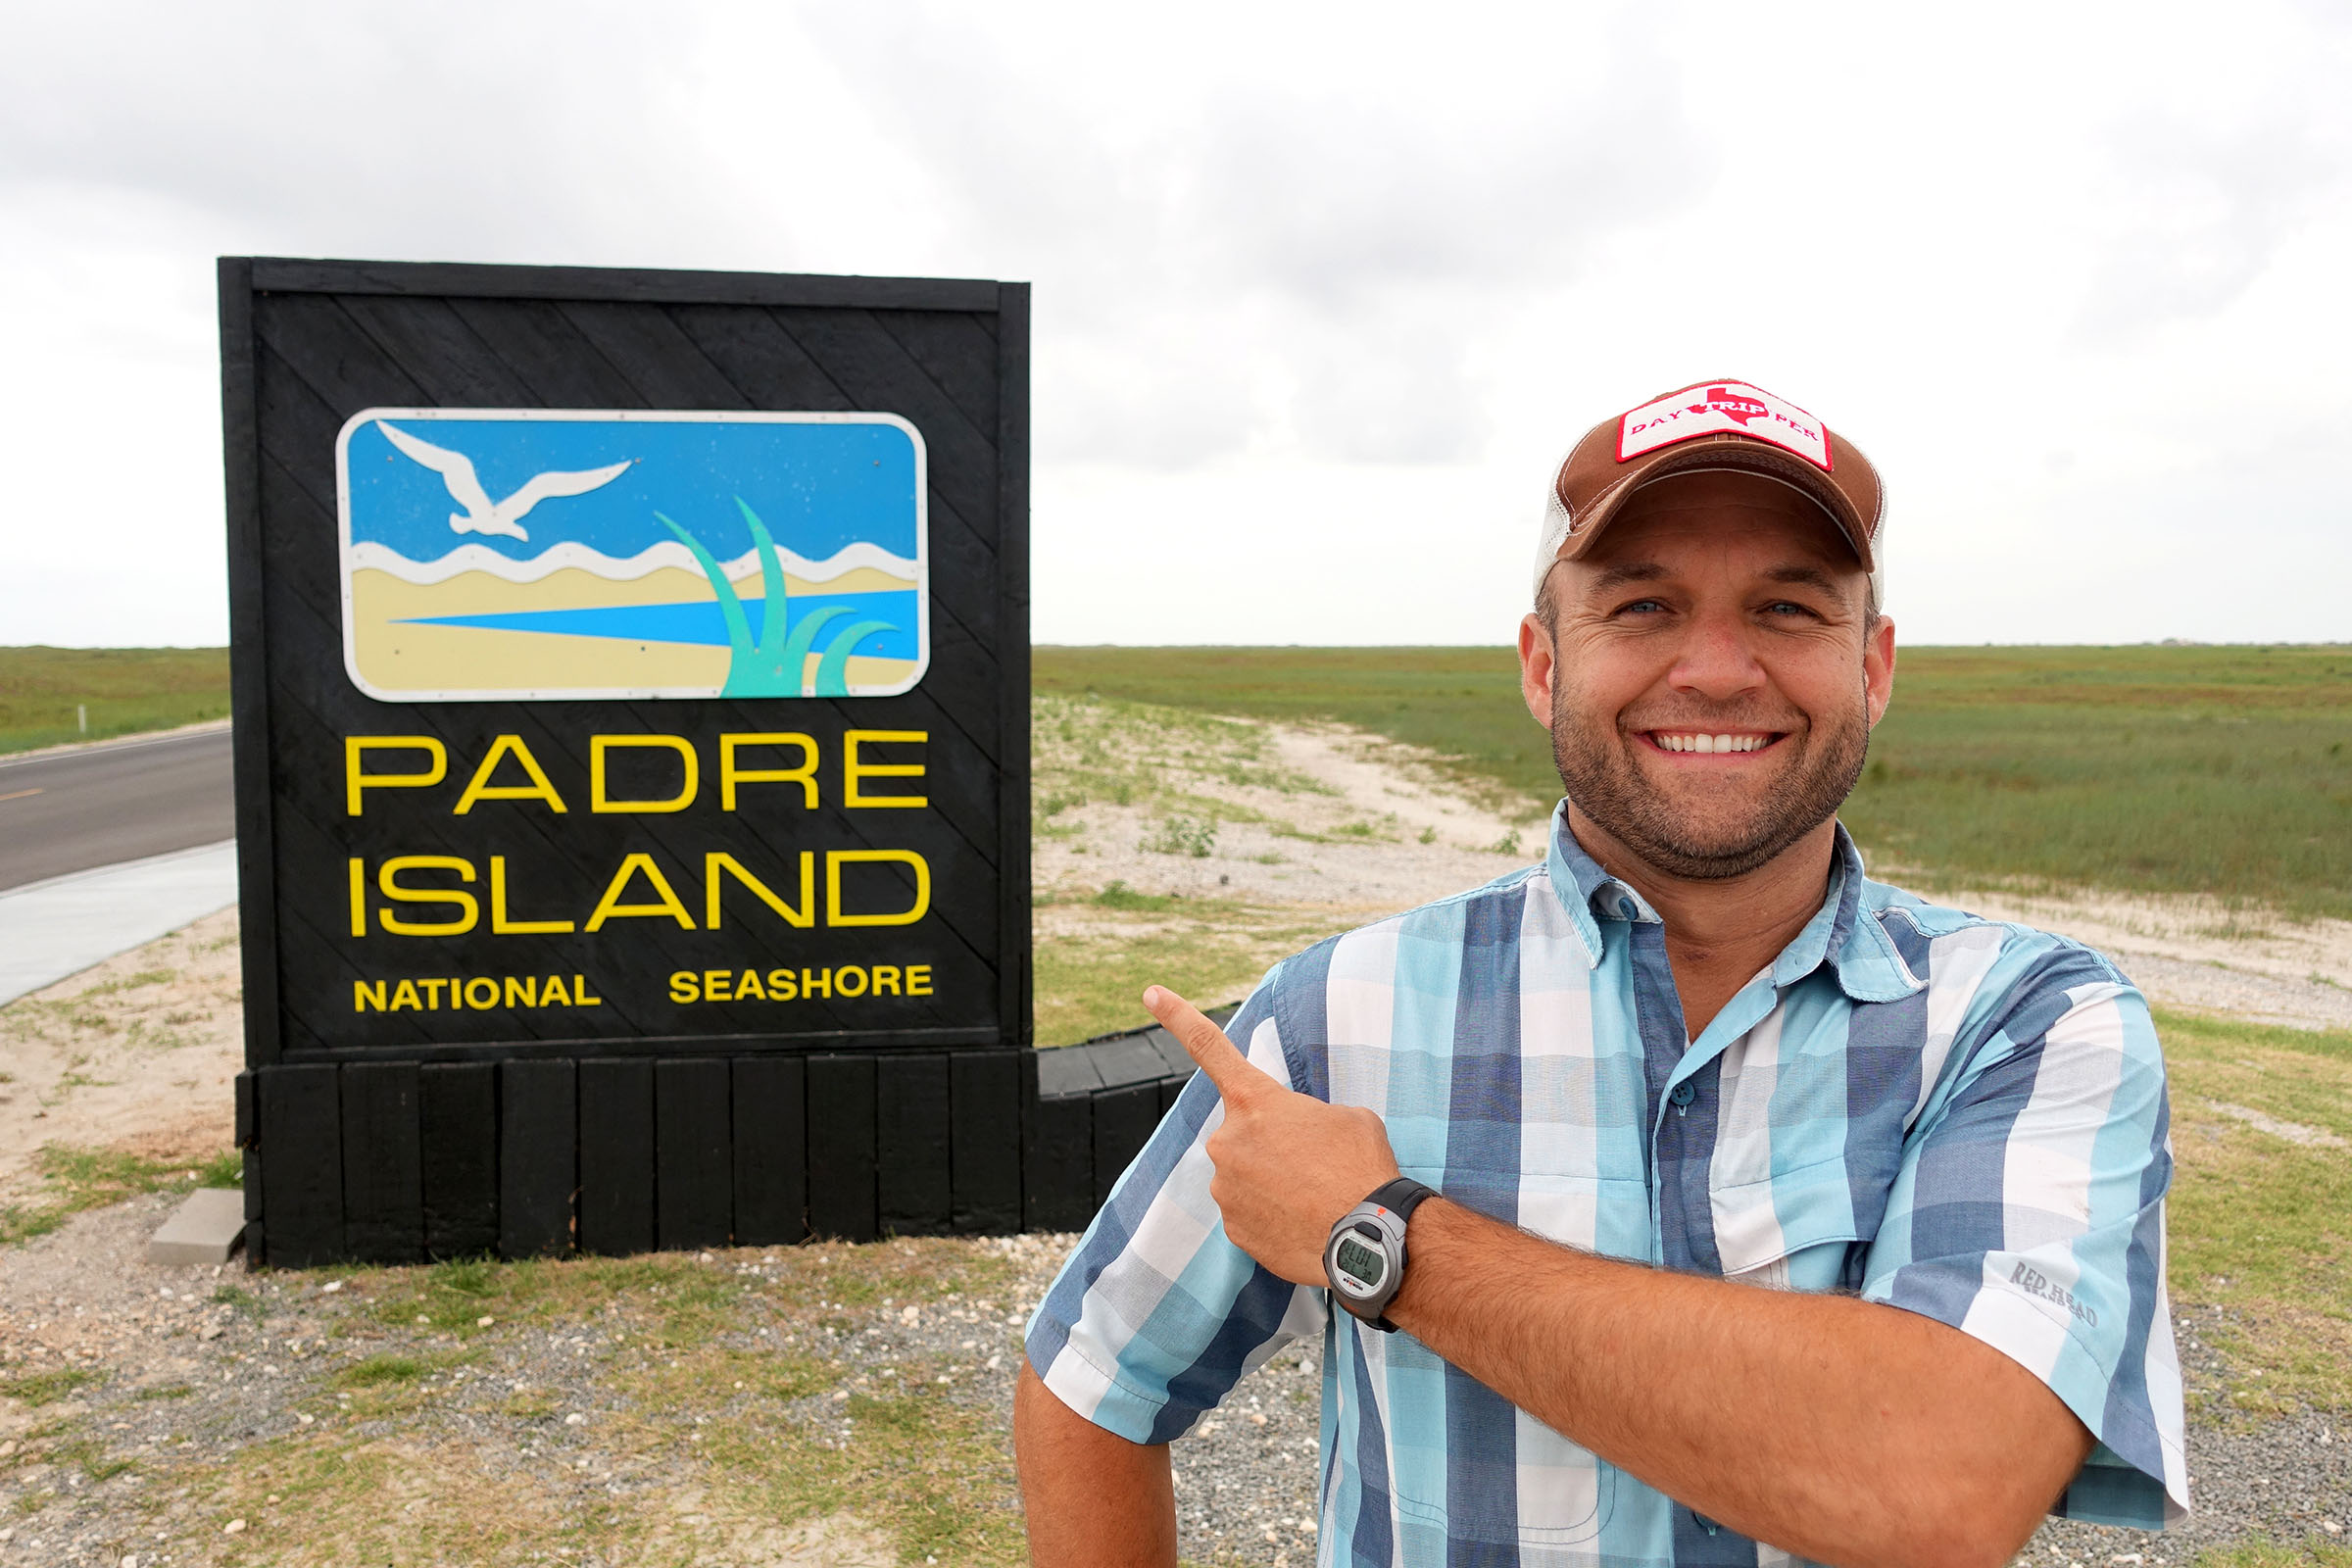 A man in a plaid shirt and baseball cap smiles and points at a sign reading "Padre Island National Seashore"